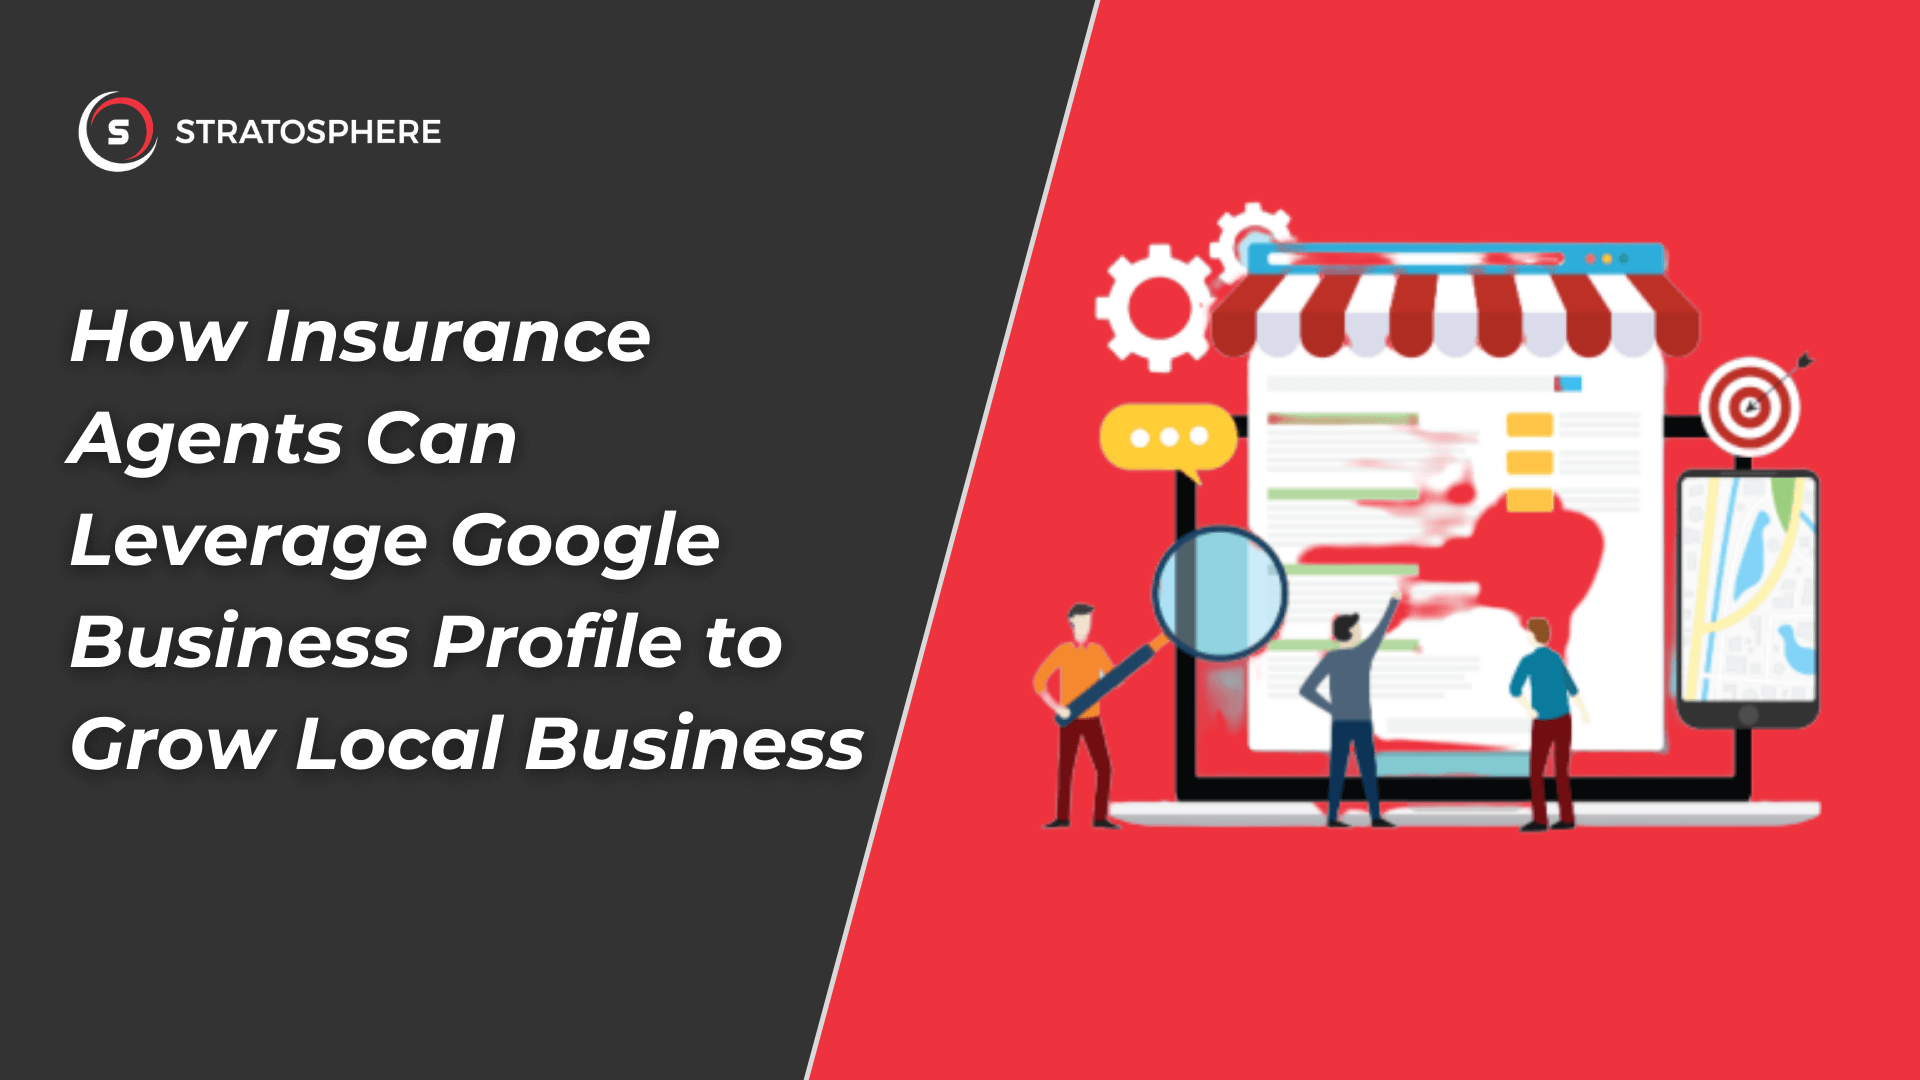 How Insurance Agents Can Leverage Google Business Profile to Grow Local Business